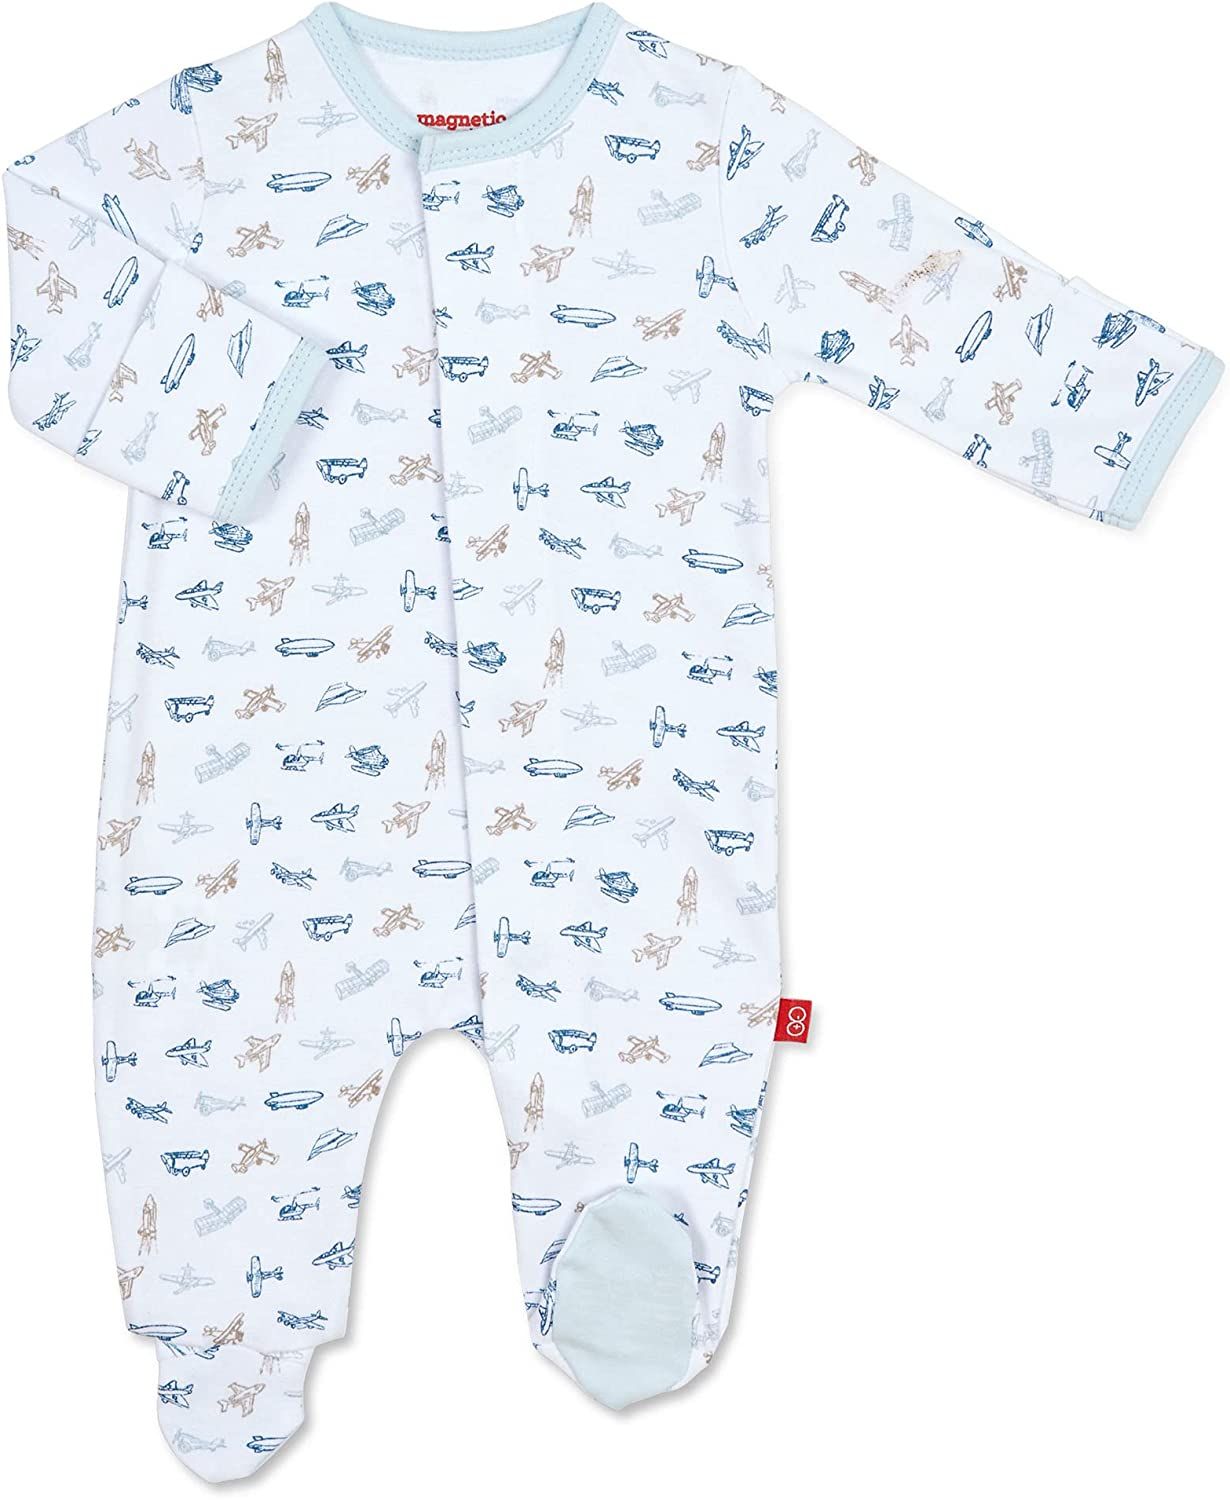 Magnificent Baby Boy 100% Cotton Footies with Magnetic Easy Close | Amazon (US)